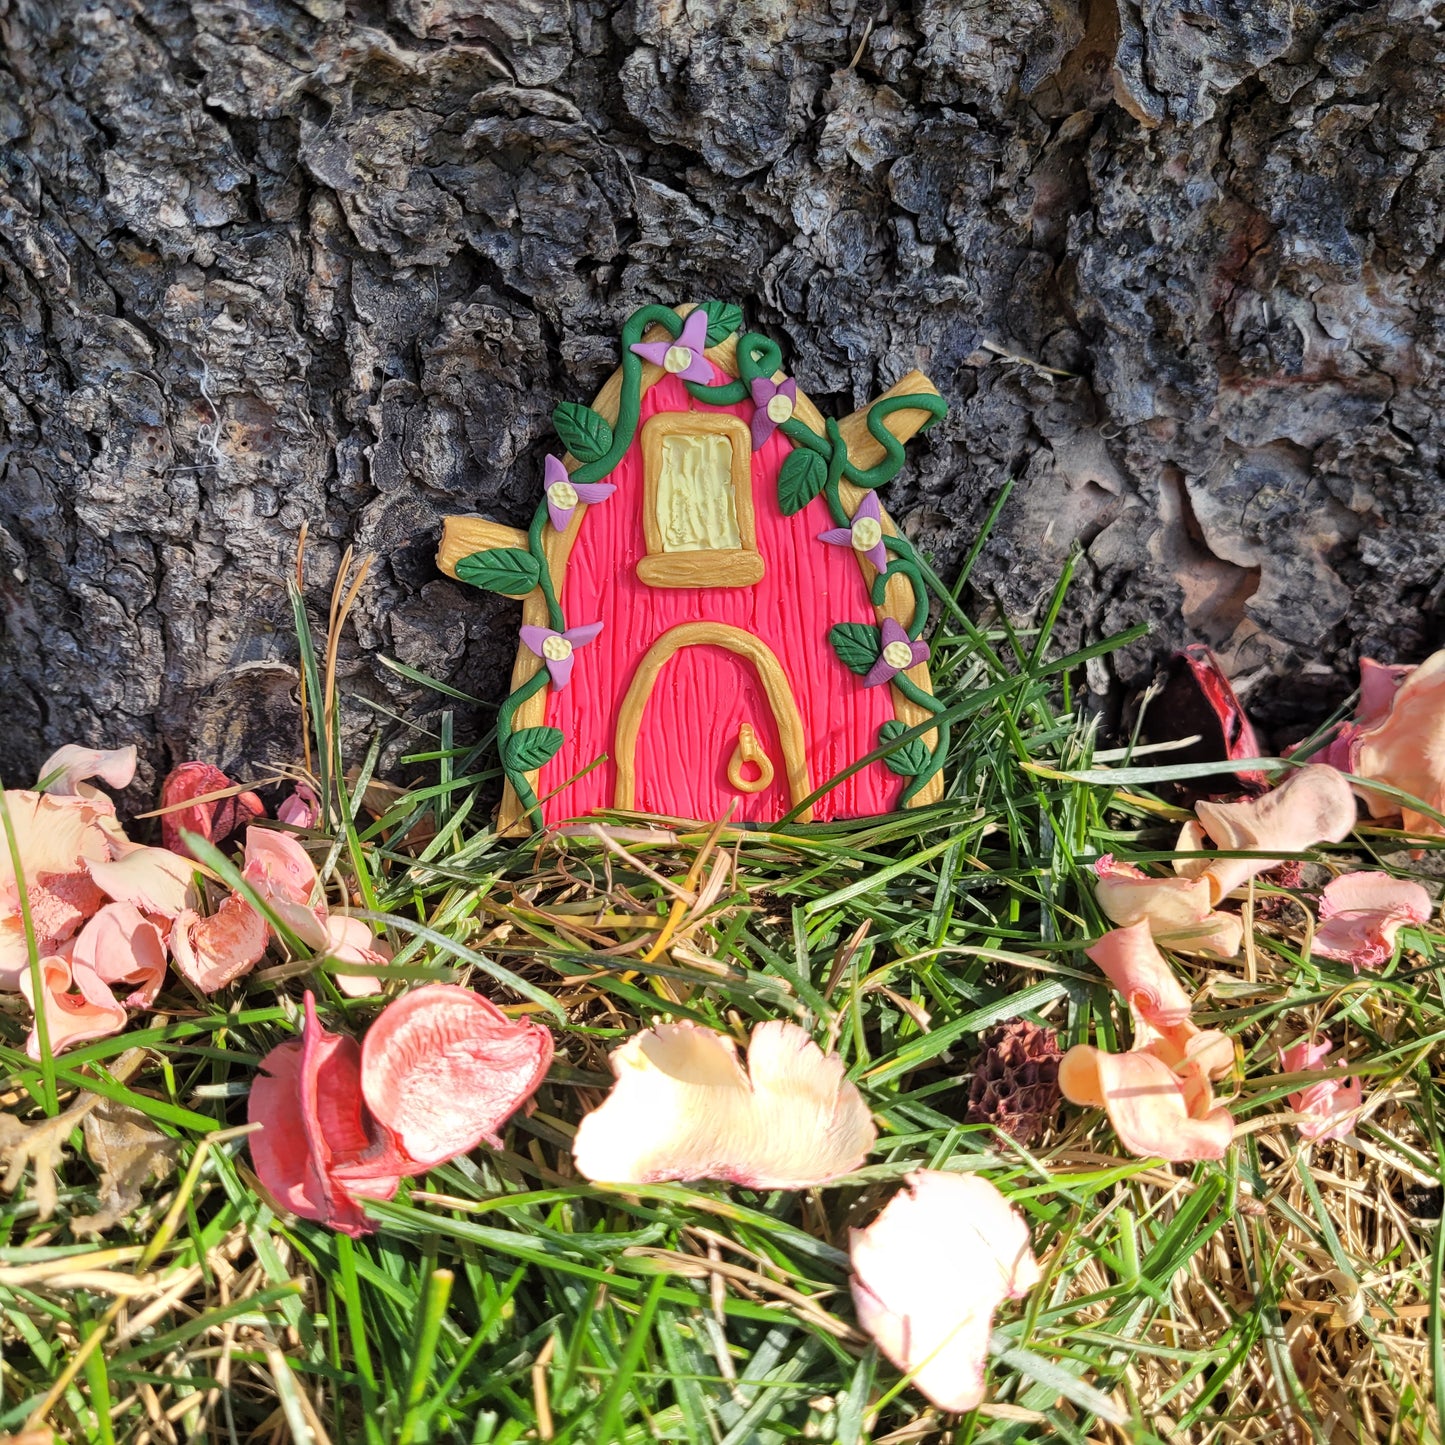 The princess fairy door rests against the bark of a tree outside surrounded by green grass and pink flower petals. The princess fairy door rests on an oak wood platform surrounded by preserved pink flower petals, wIt is pink with gold trim, green vines and leaves, and purple flowers.